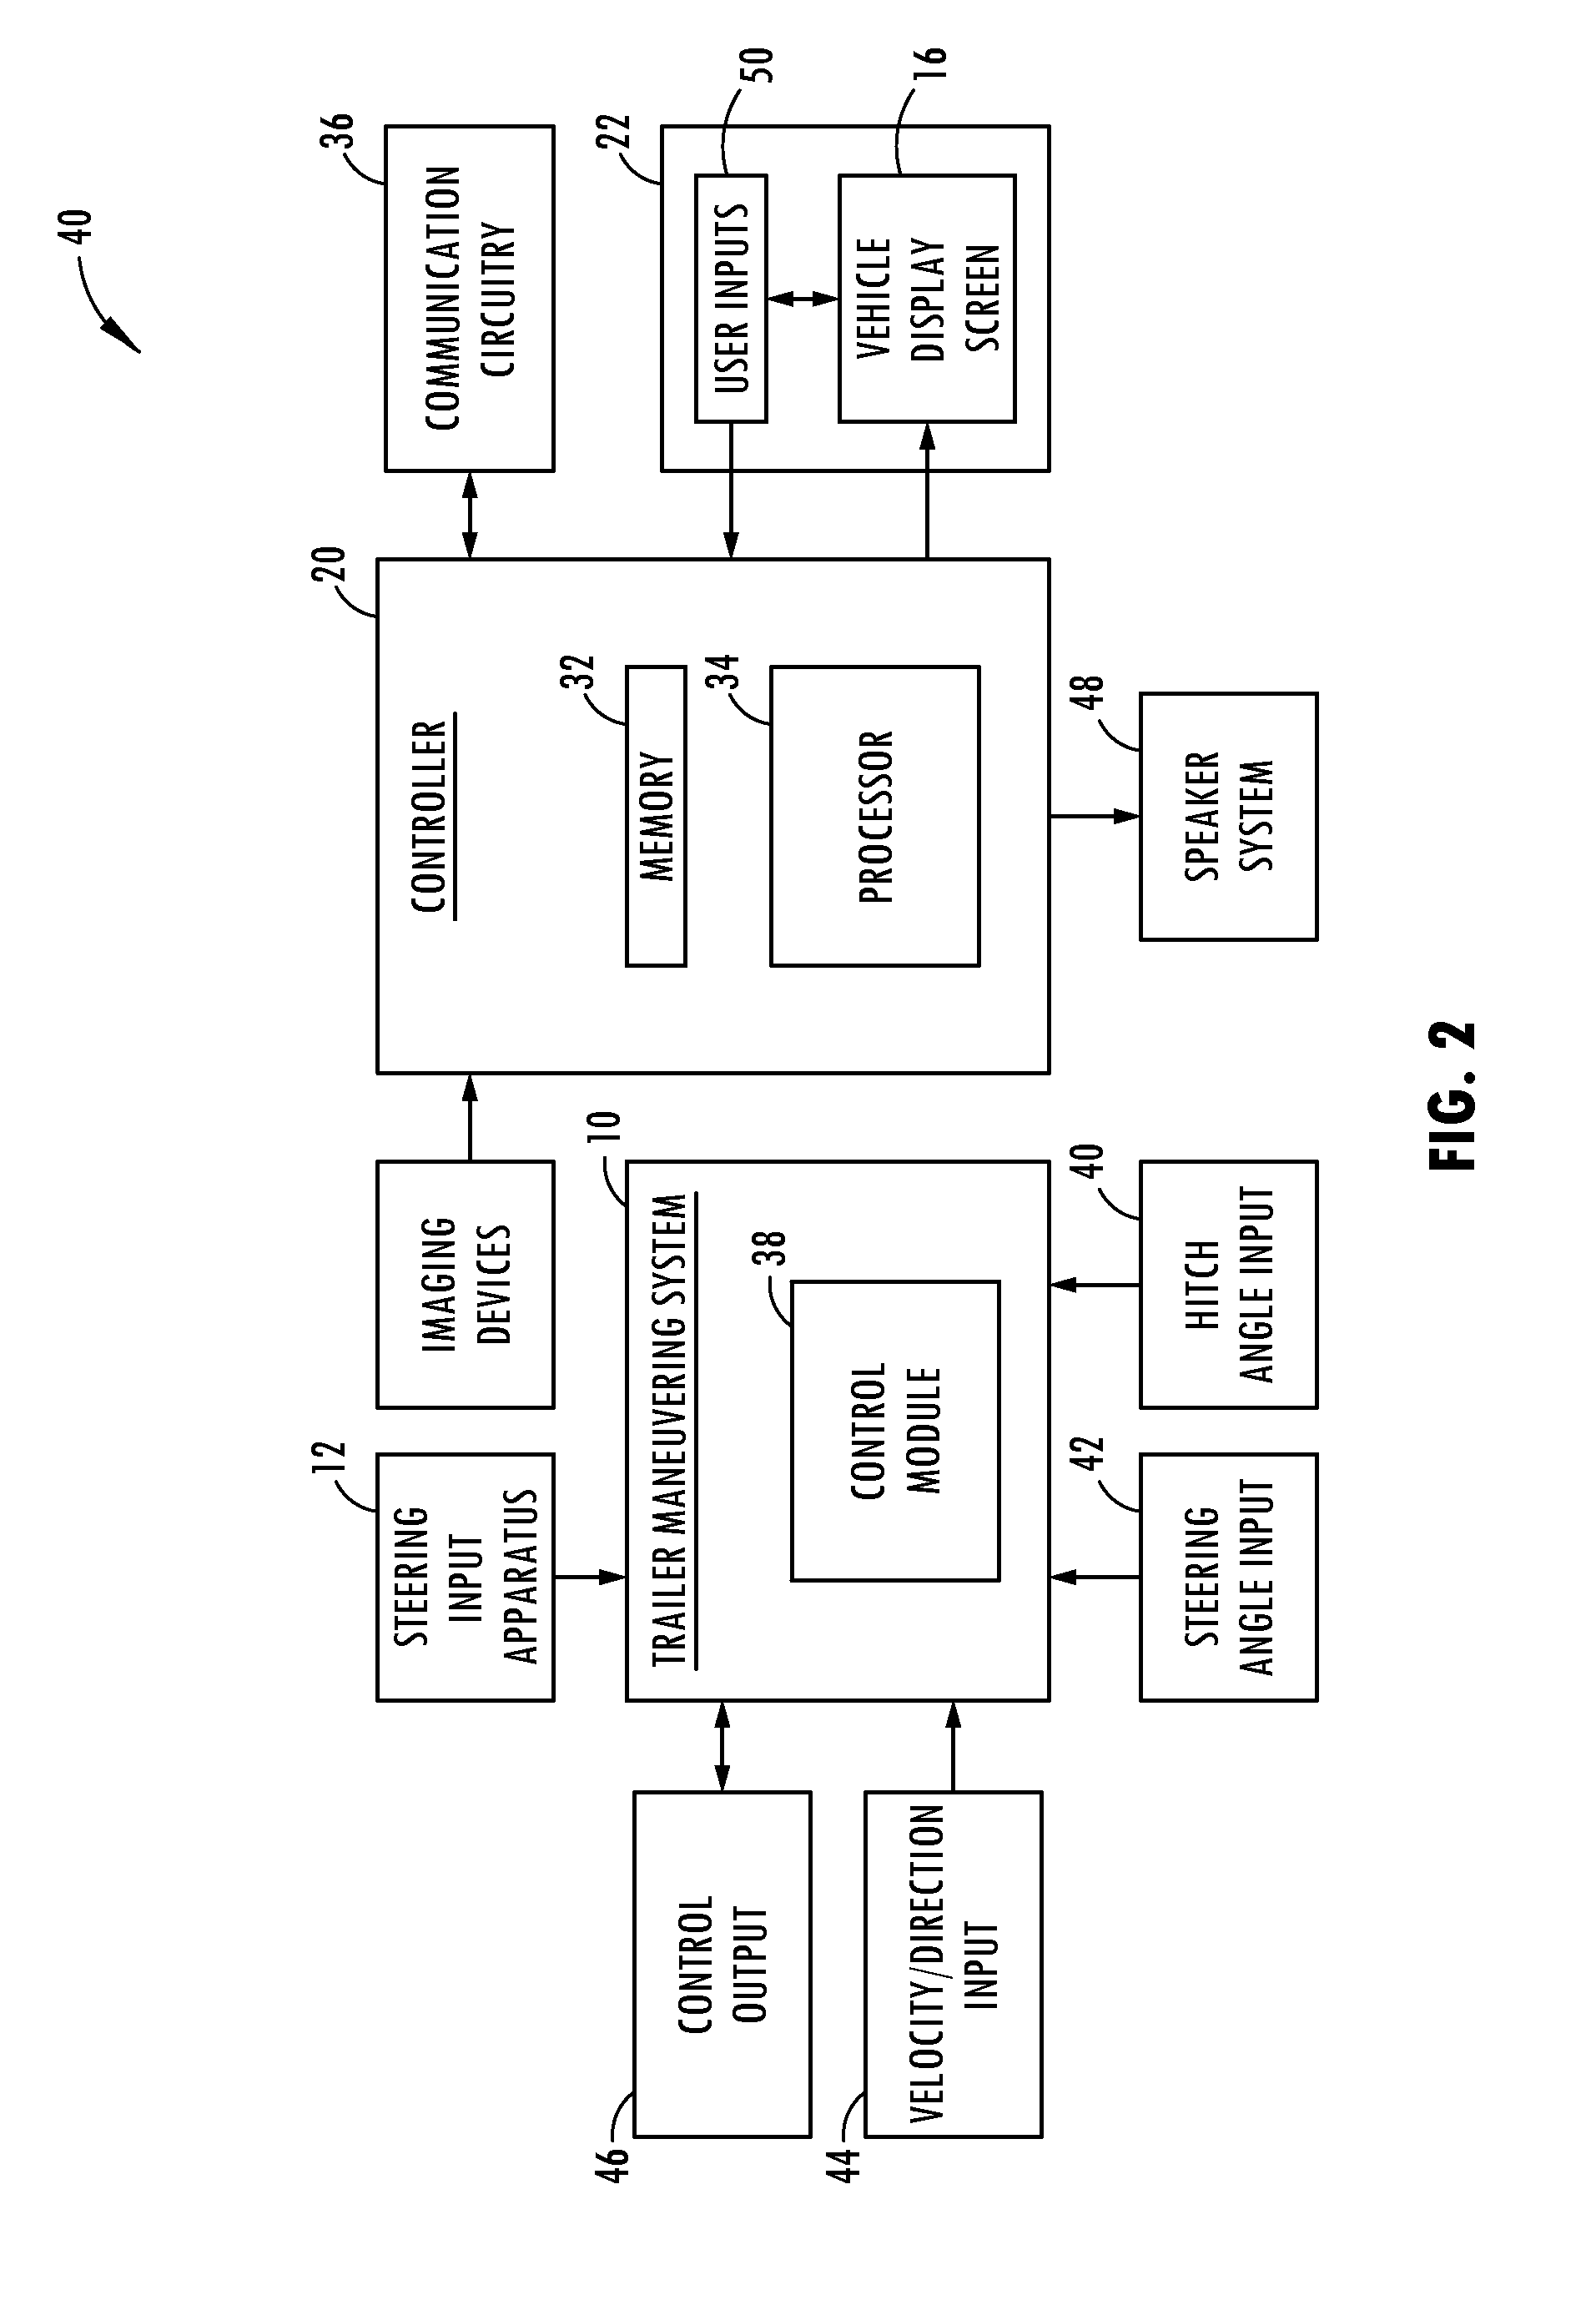 Methods and systems for configuring of a trailer maneuvering system